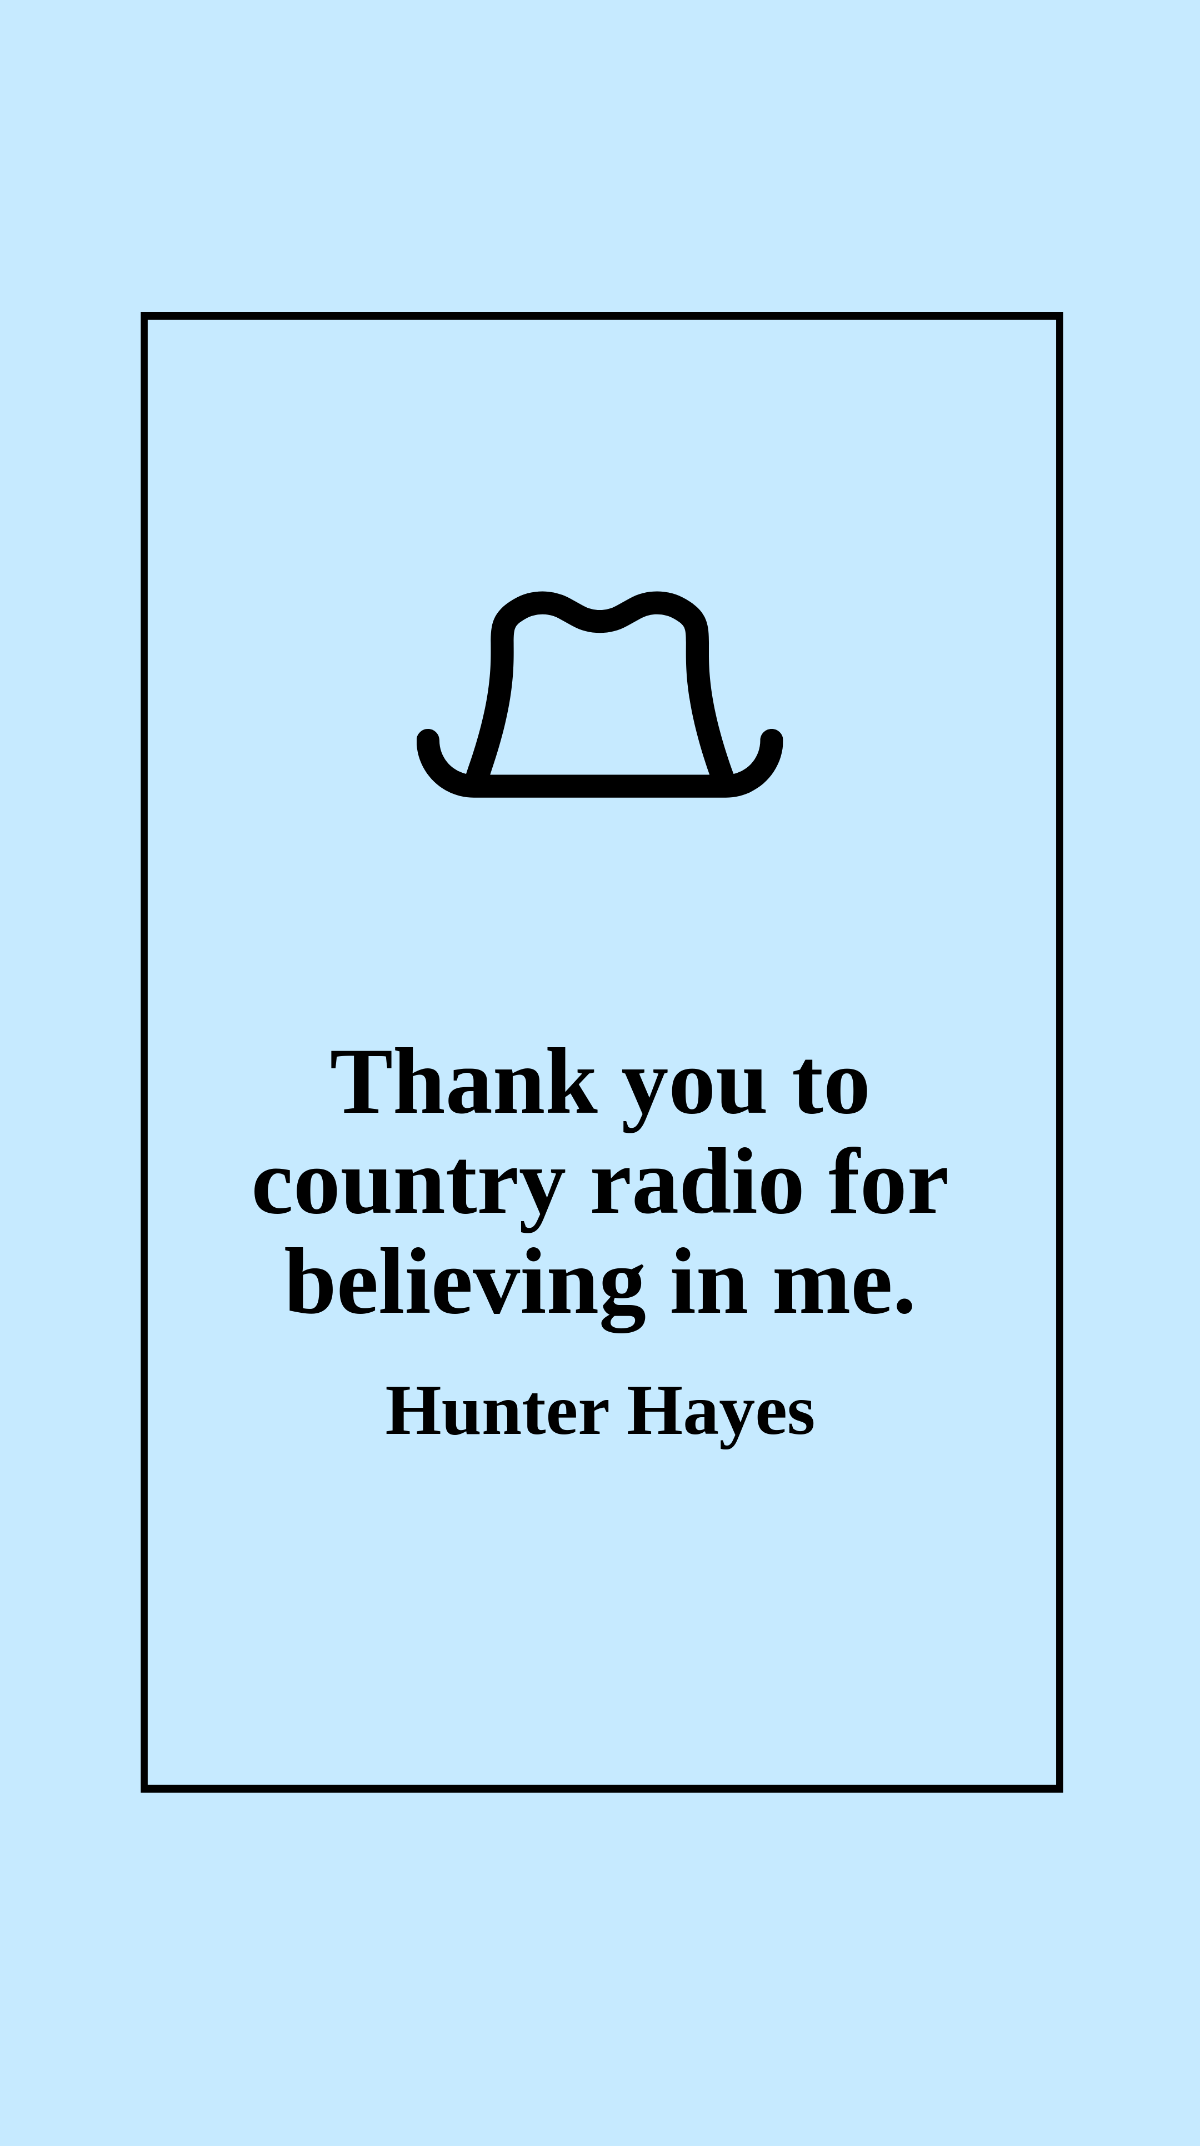 Free Hunter Hayes - Thank you to country radio for believing in me. Template